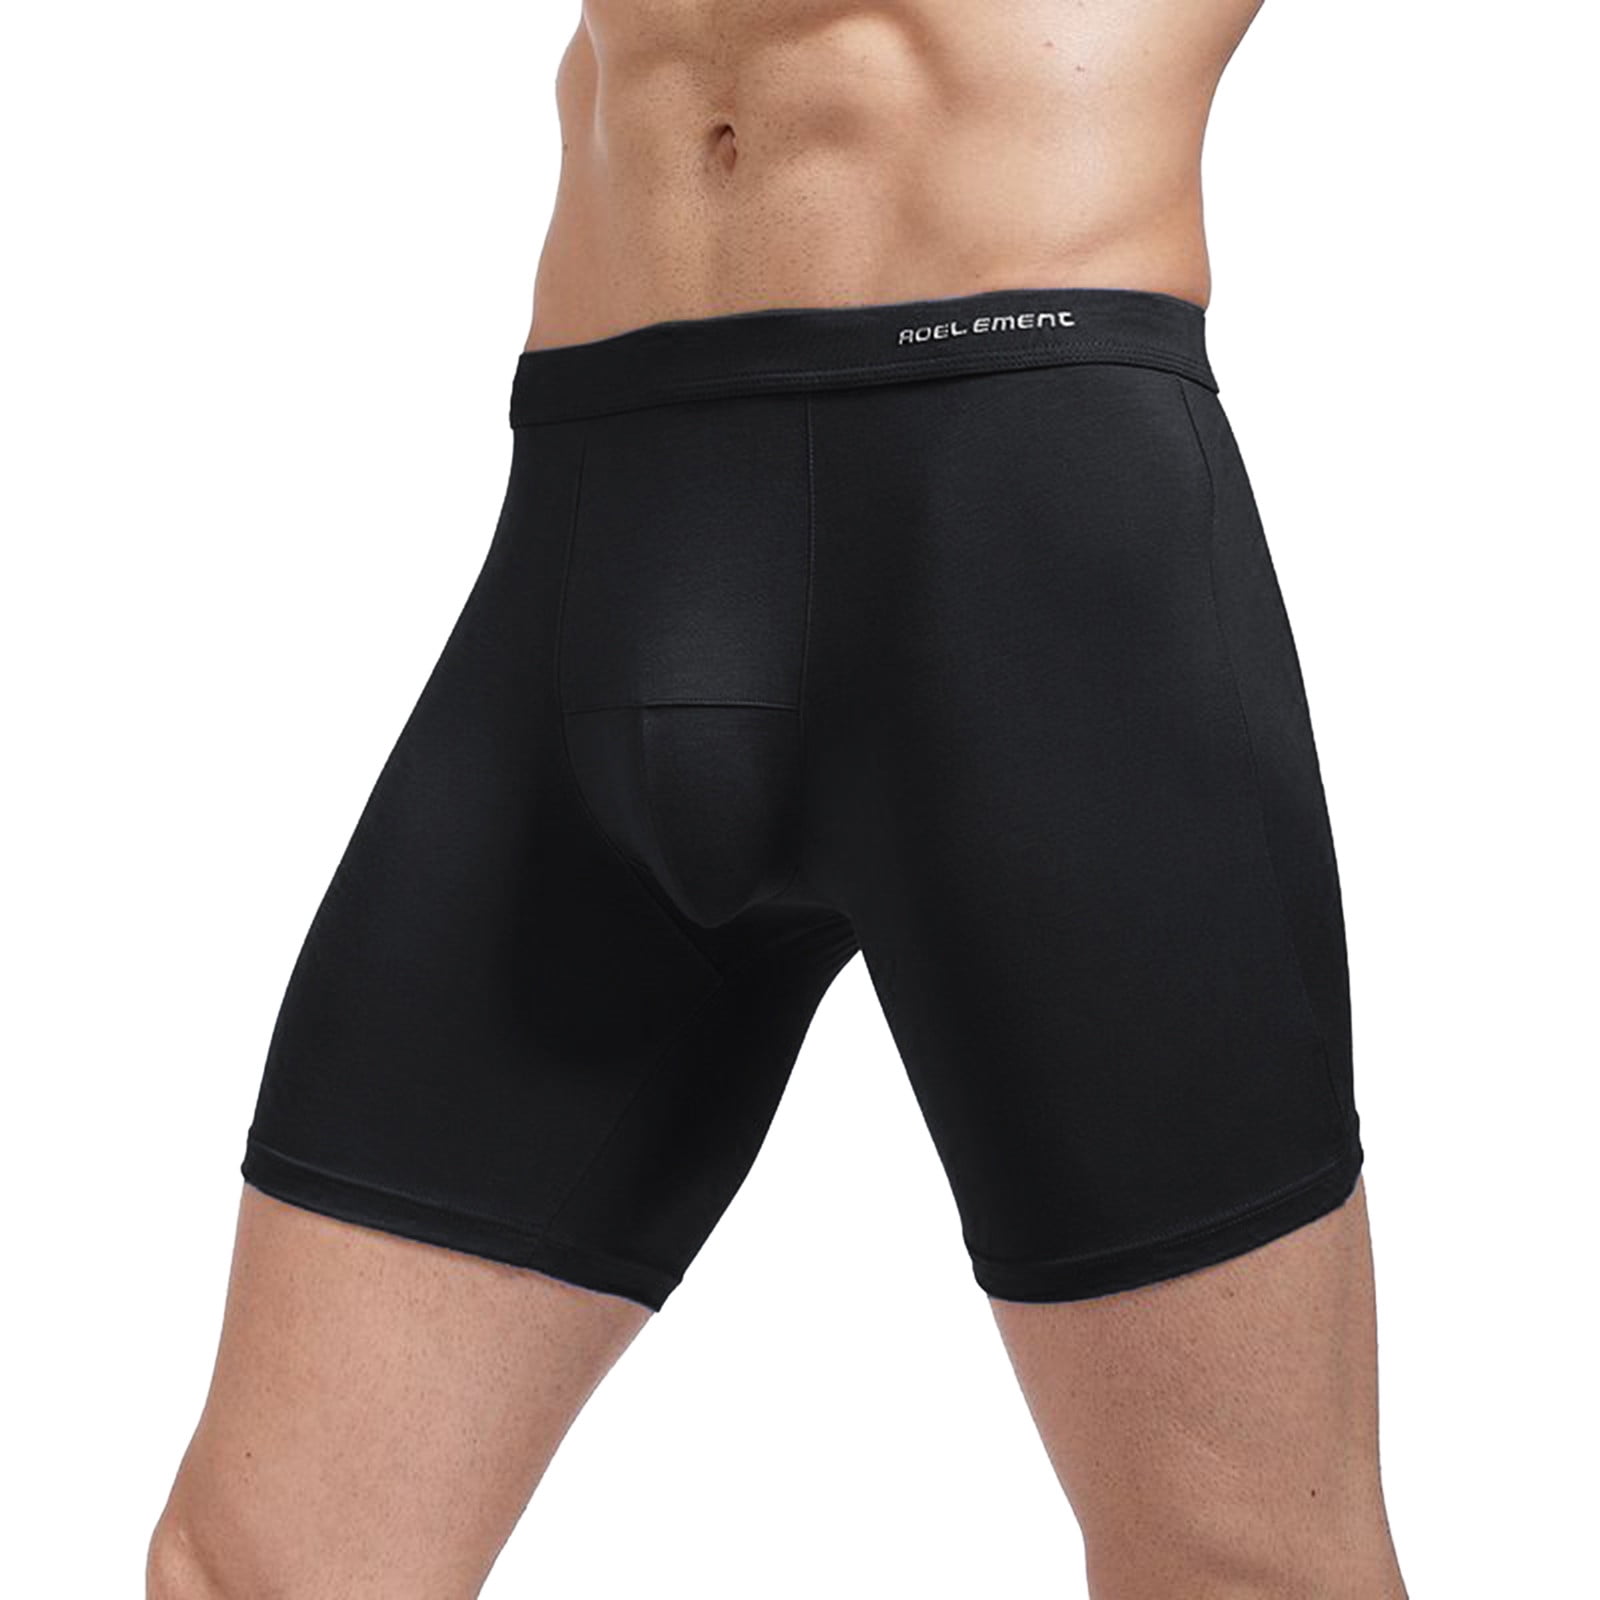 White Mens Underwear Men'S Out Running Tight Pants Are Breathable Boxers  Movement Polyester